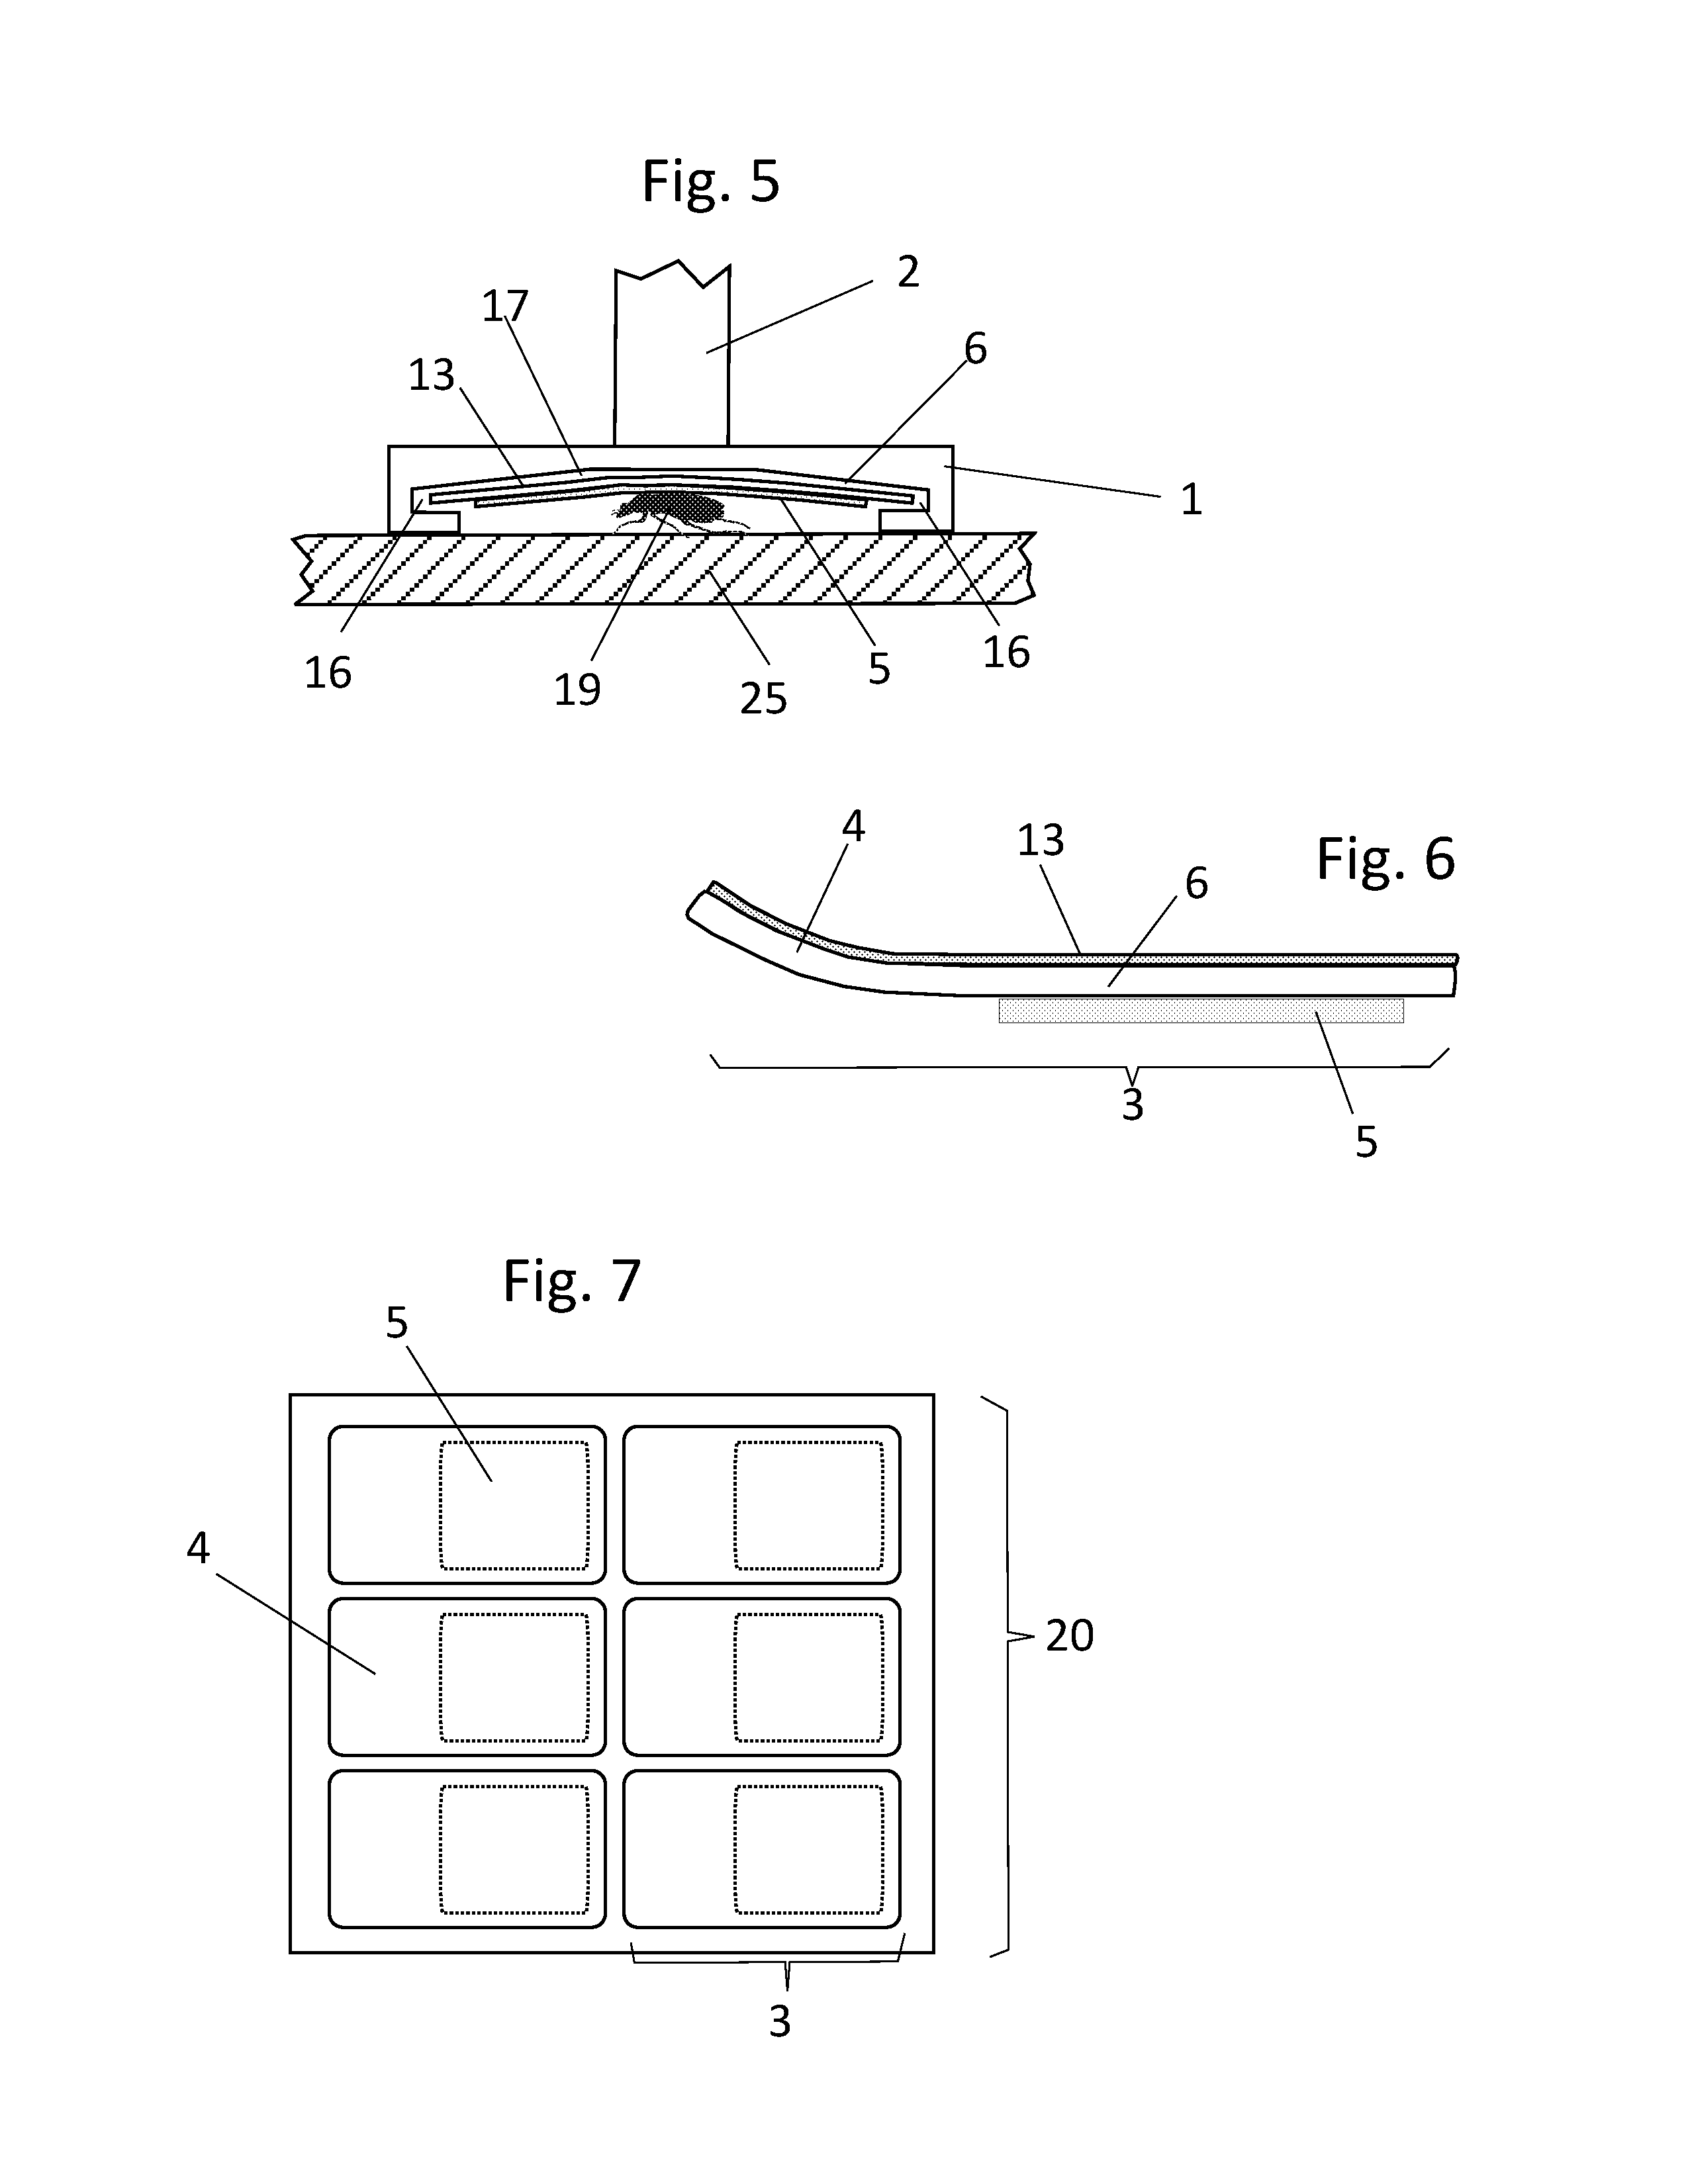 Insect capture device and system